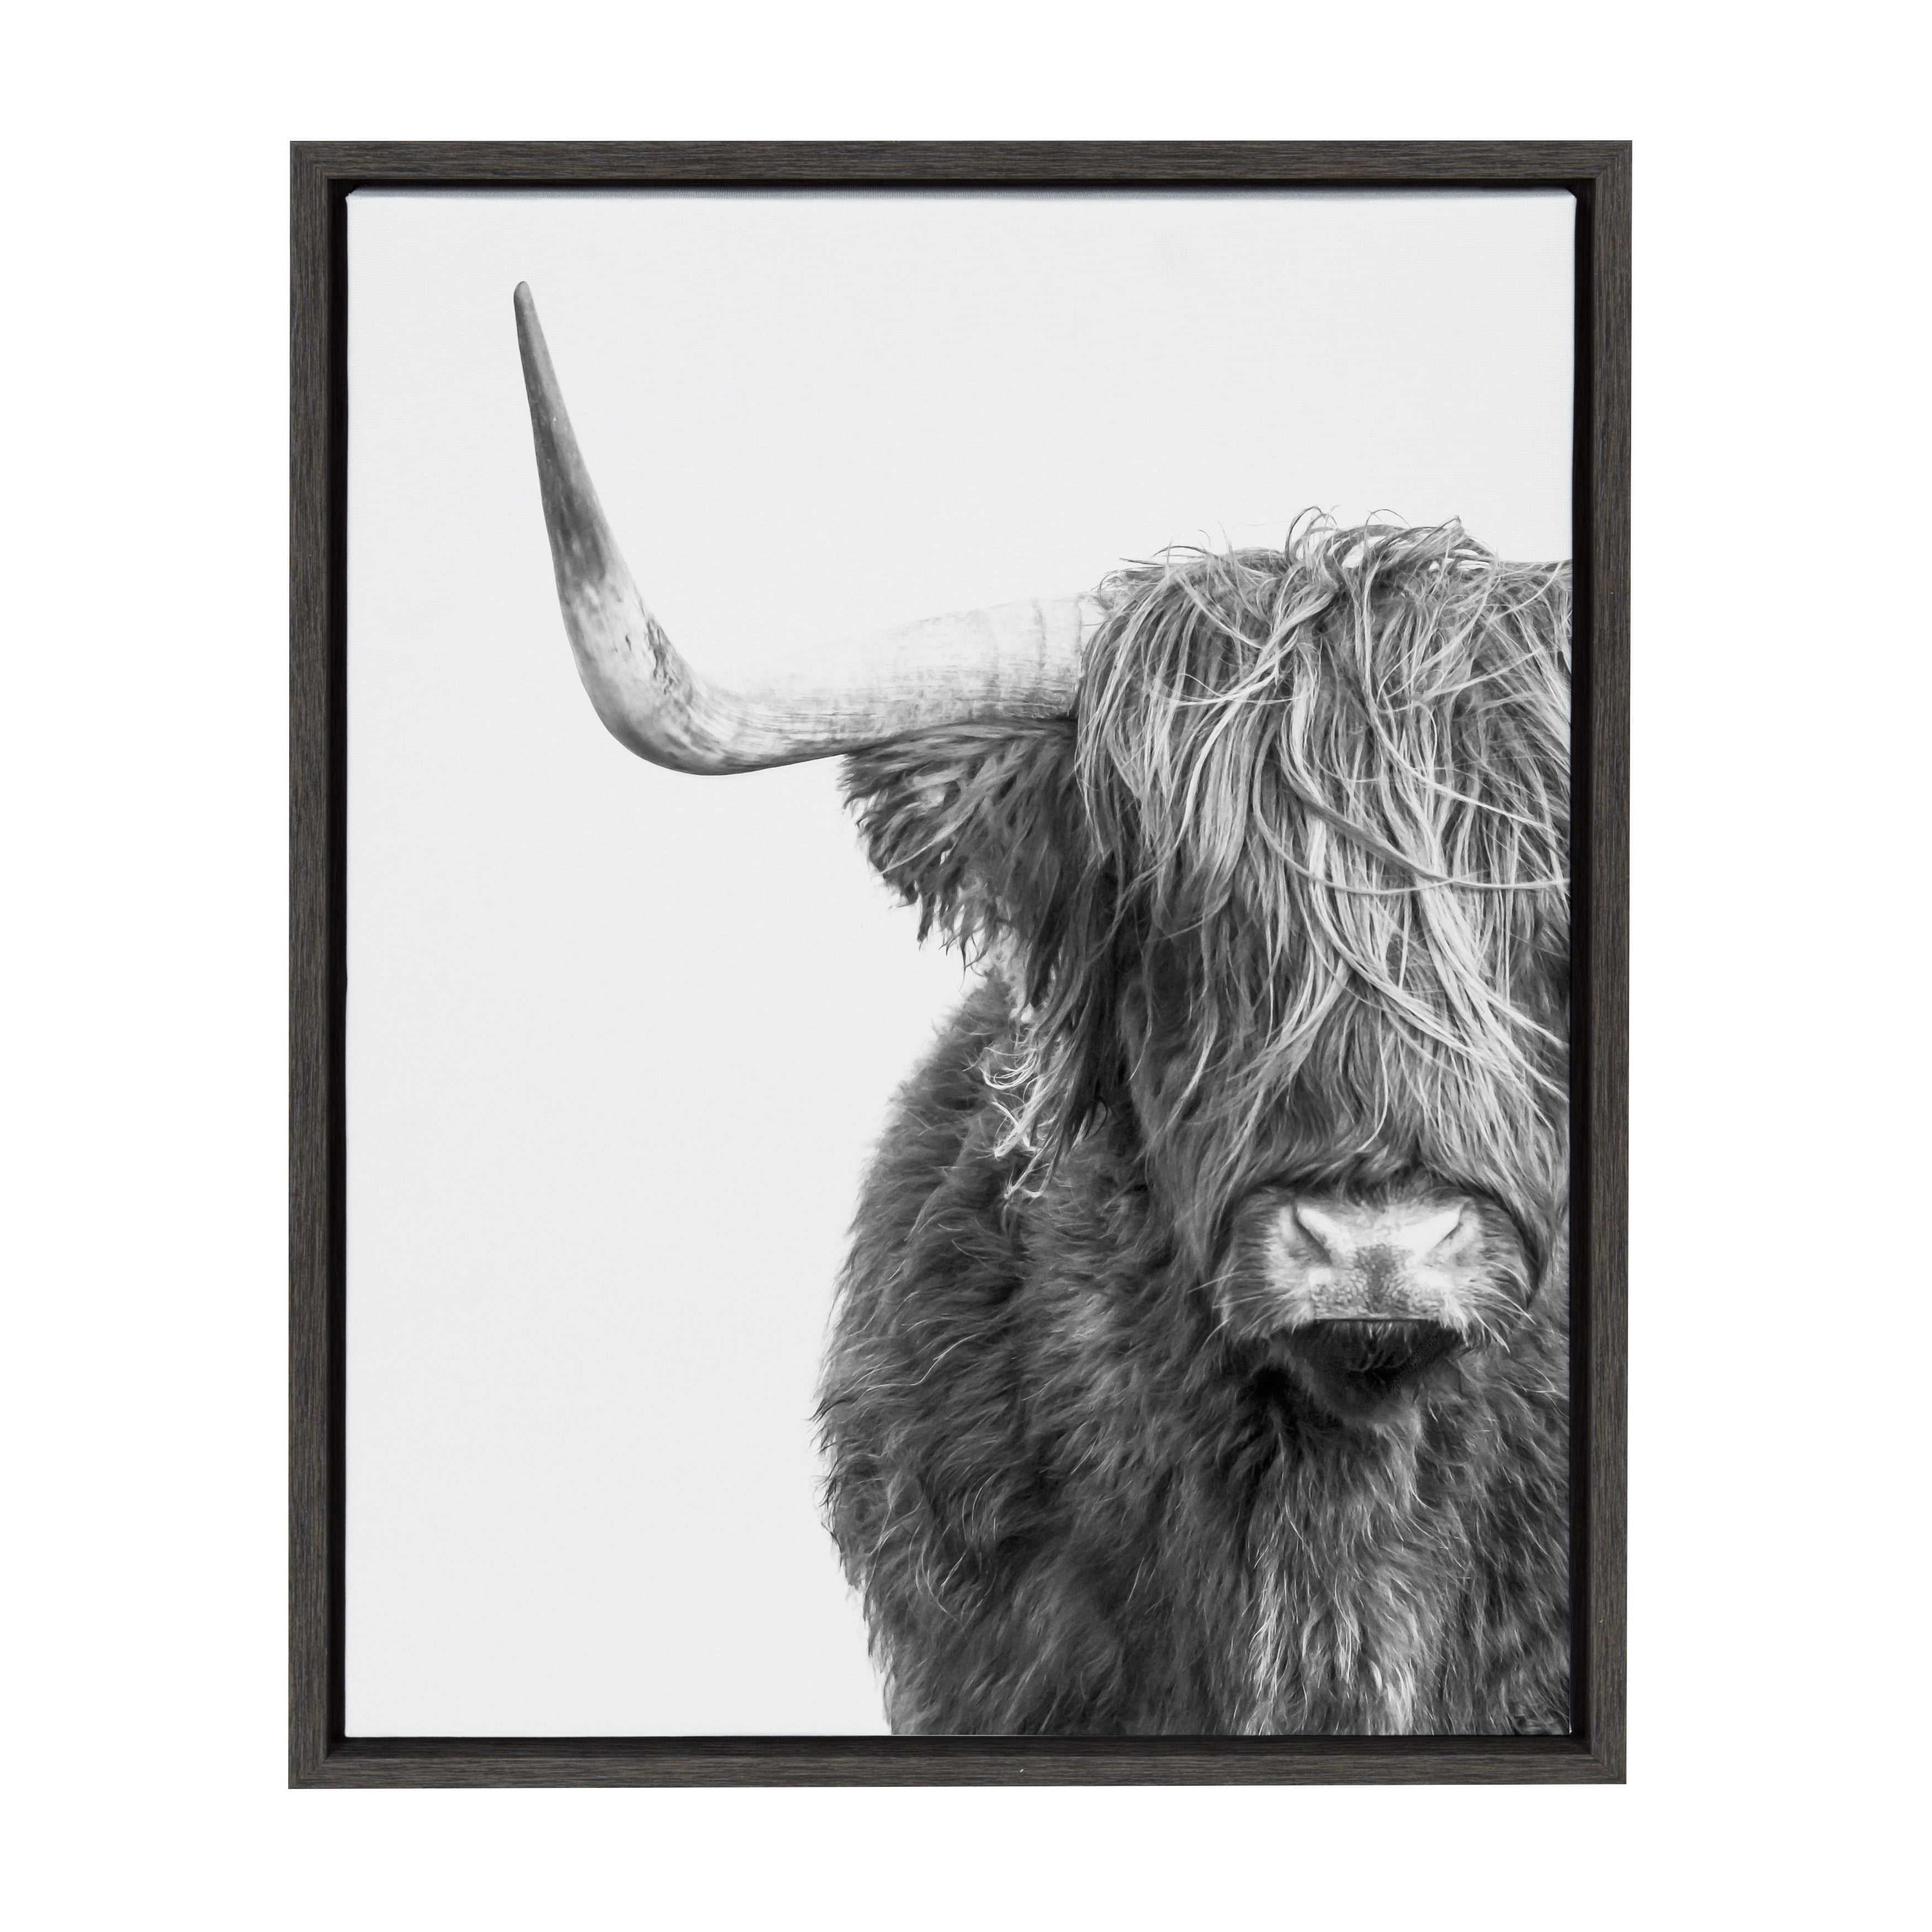 Black and White Cow Canvas Prints Painting Wall Art Picture for Home Decor